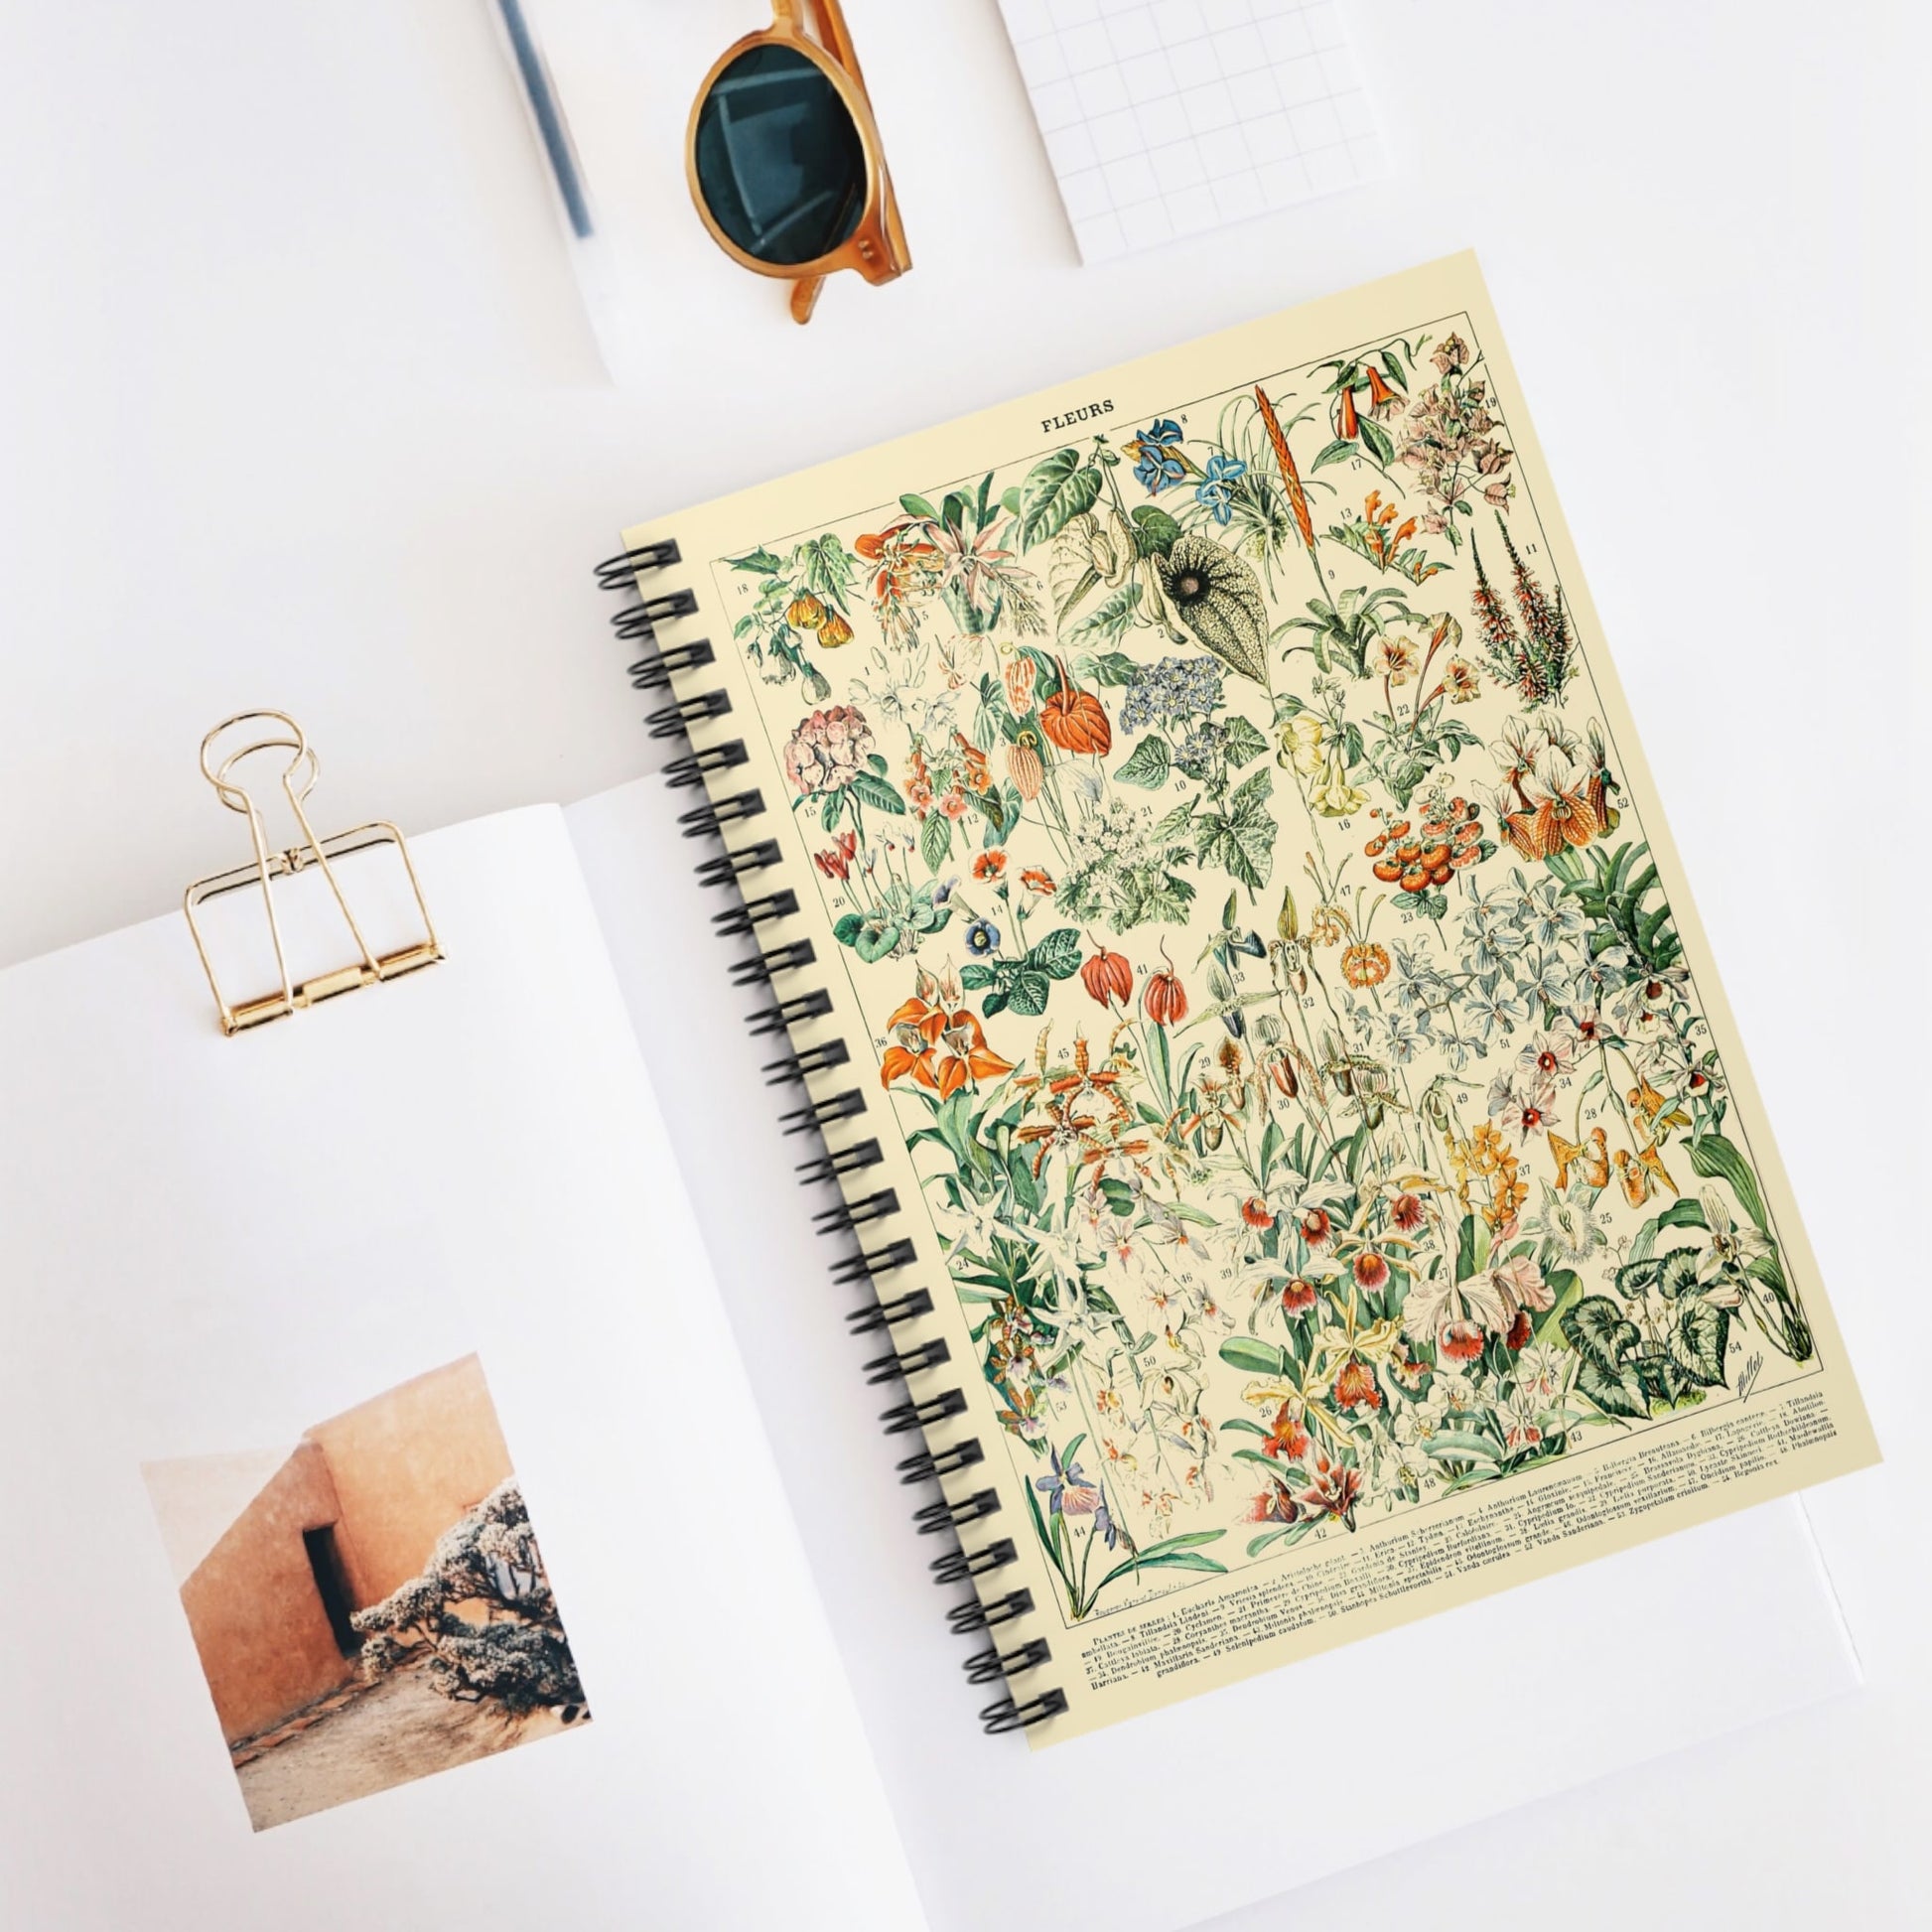 Wildflower and Plants Spiral Notebook Displayed on Desk